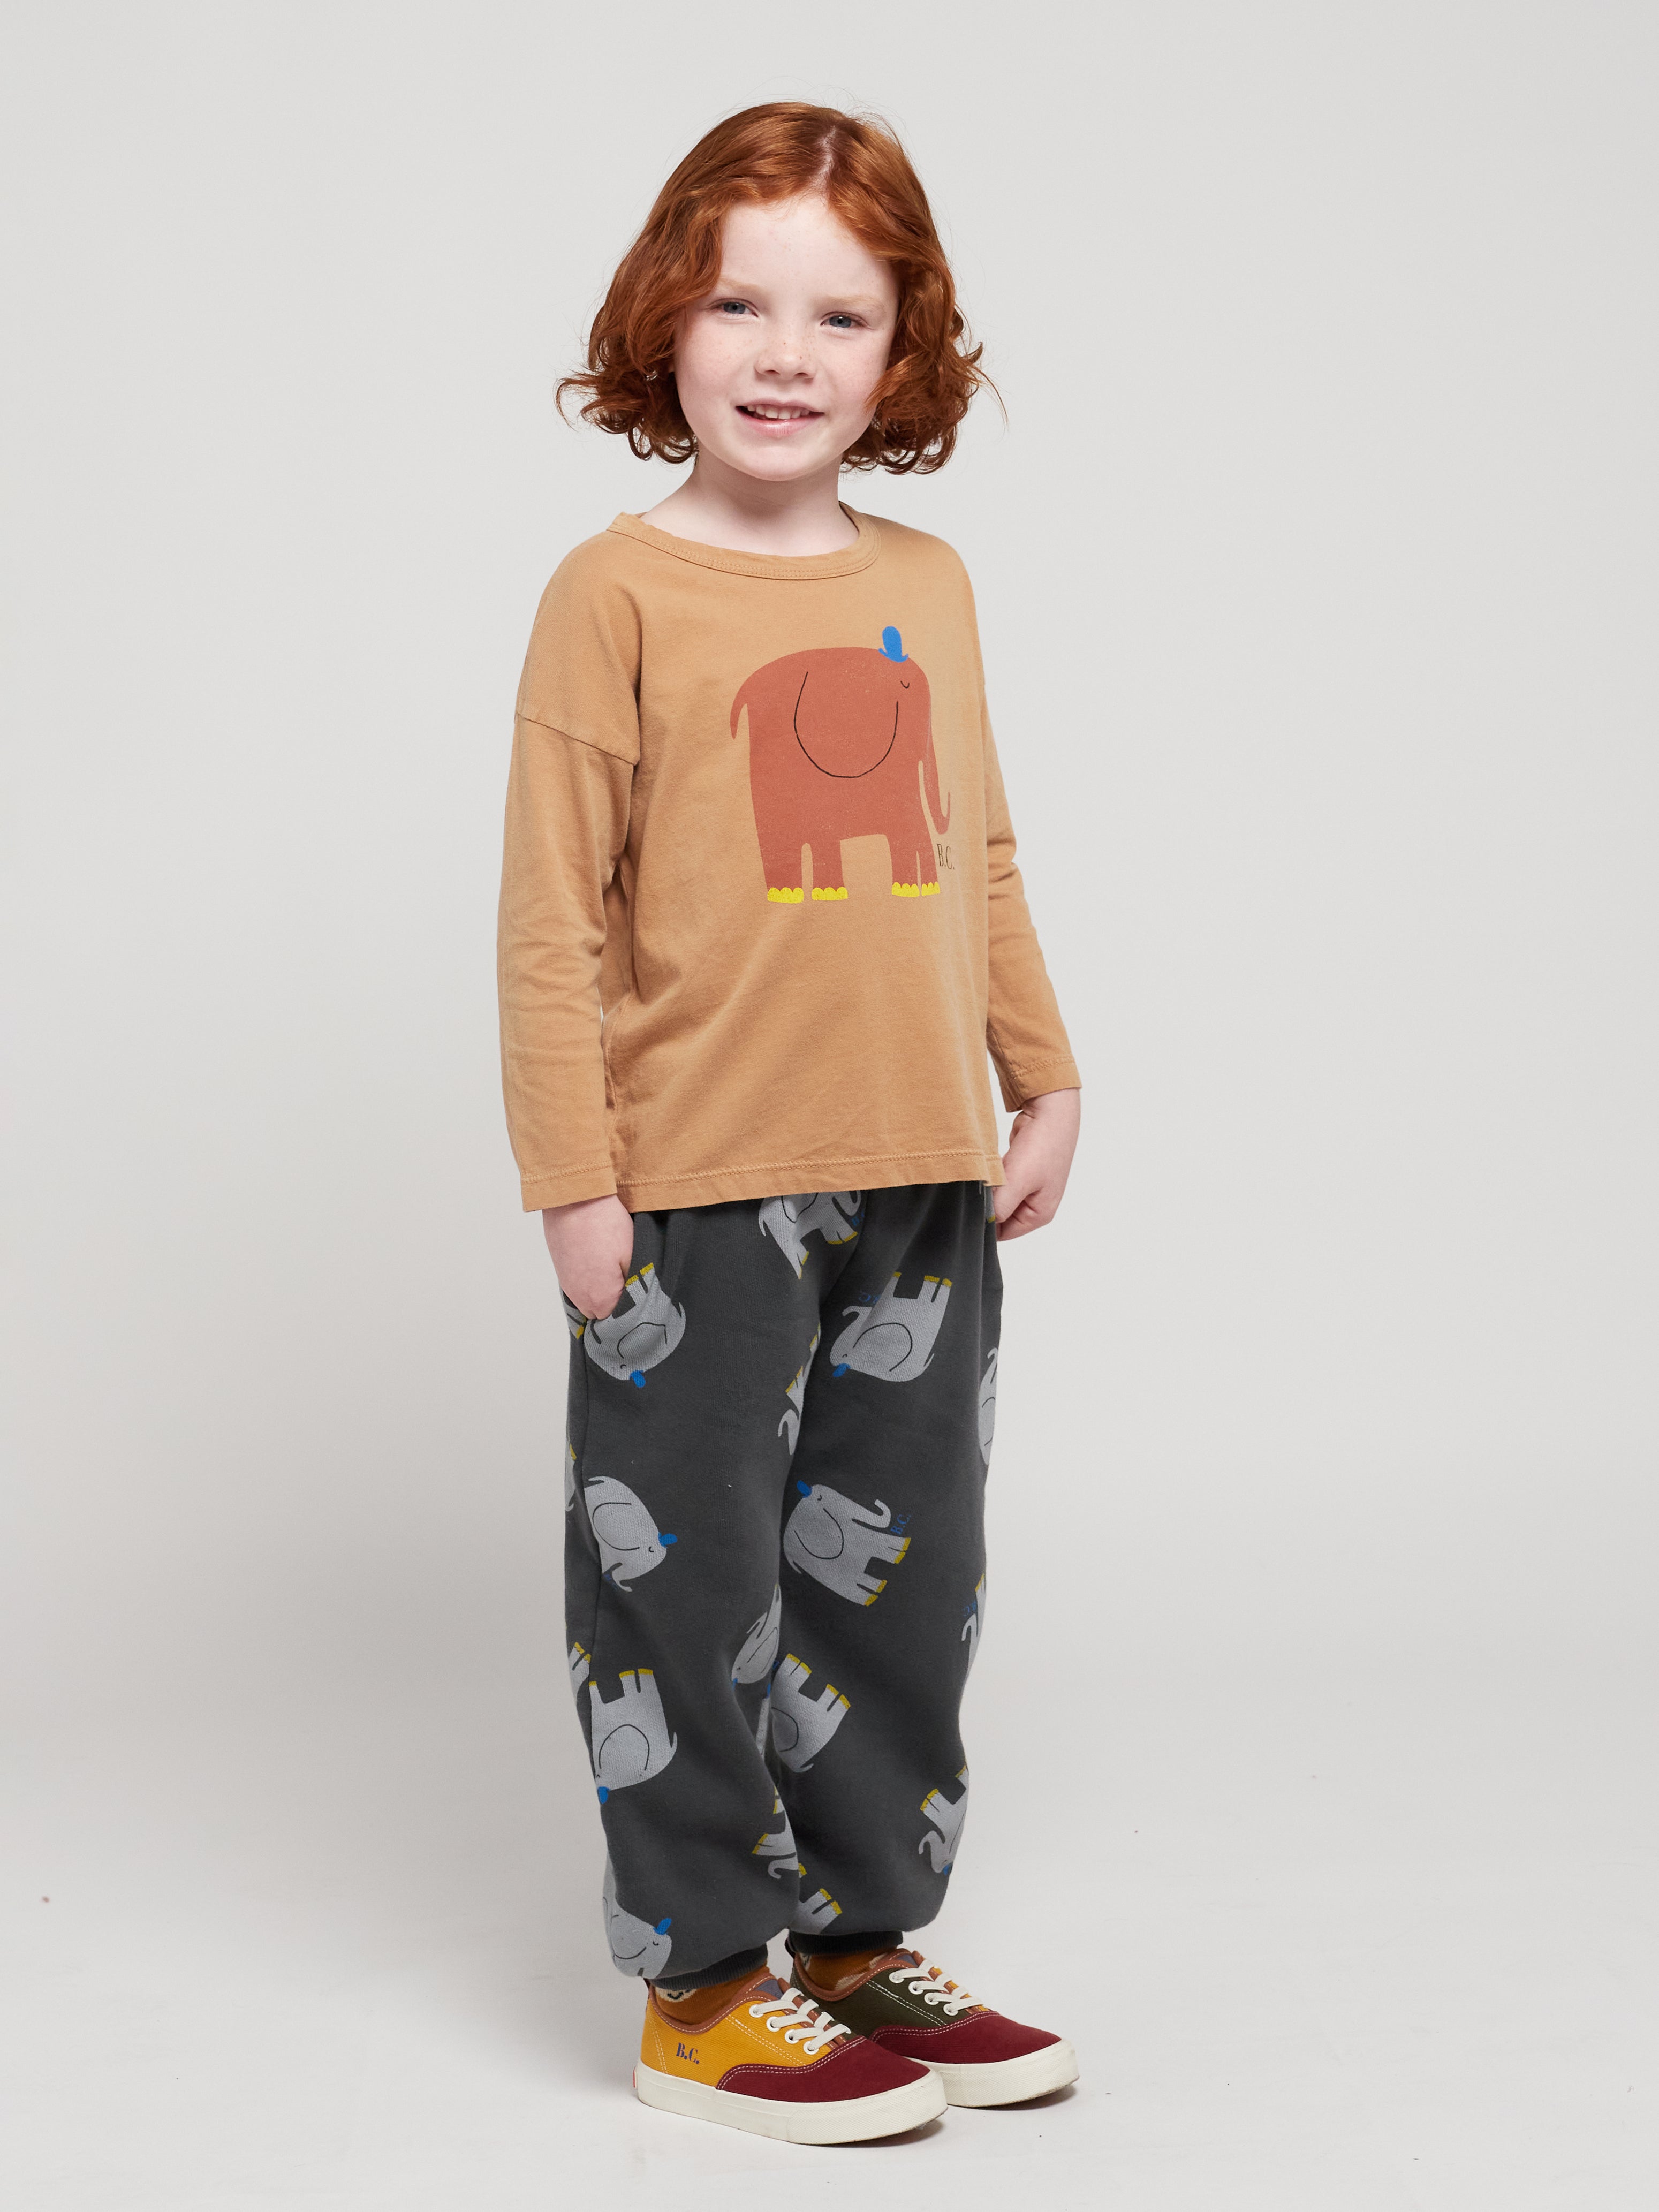 Bobo Choses | The Elephant all over jogging pants